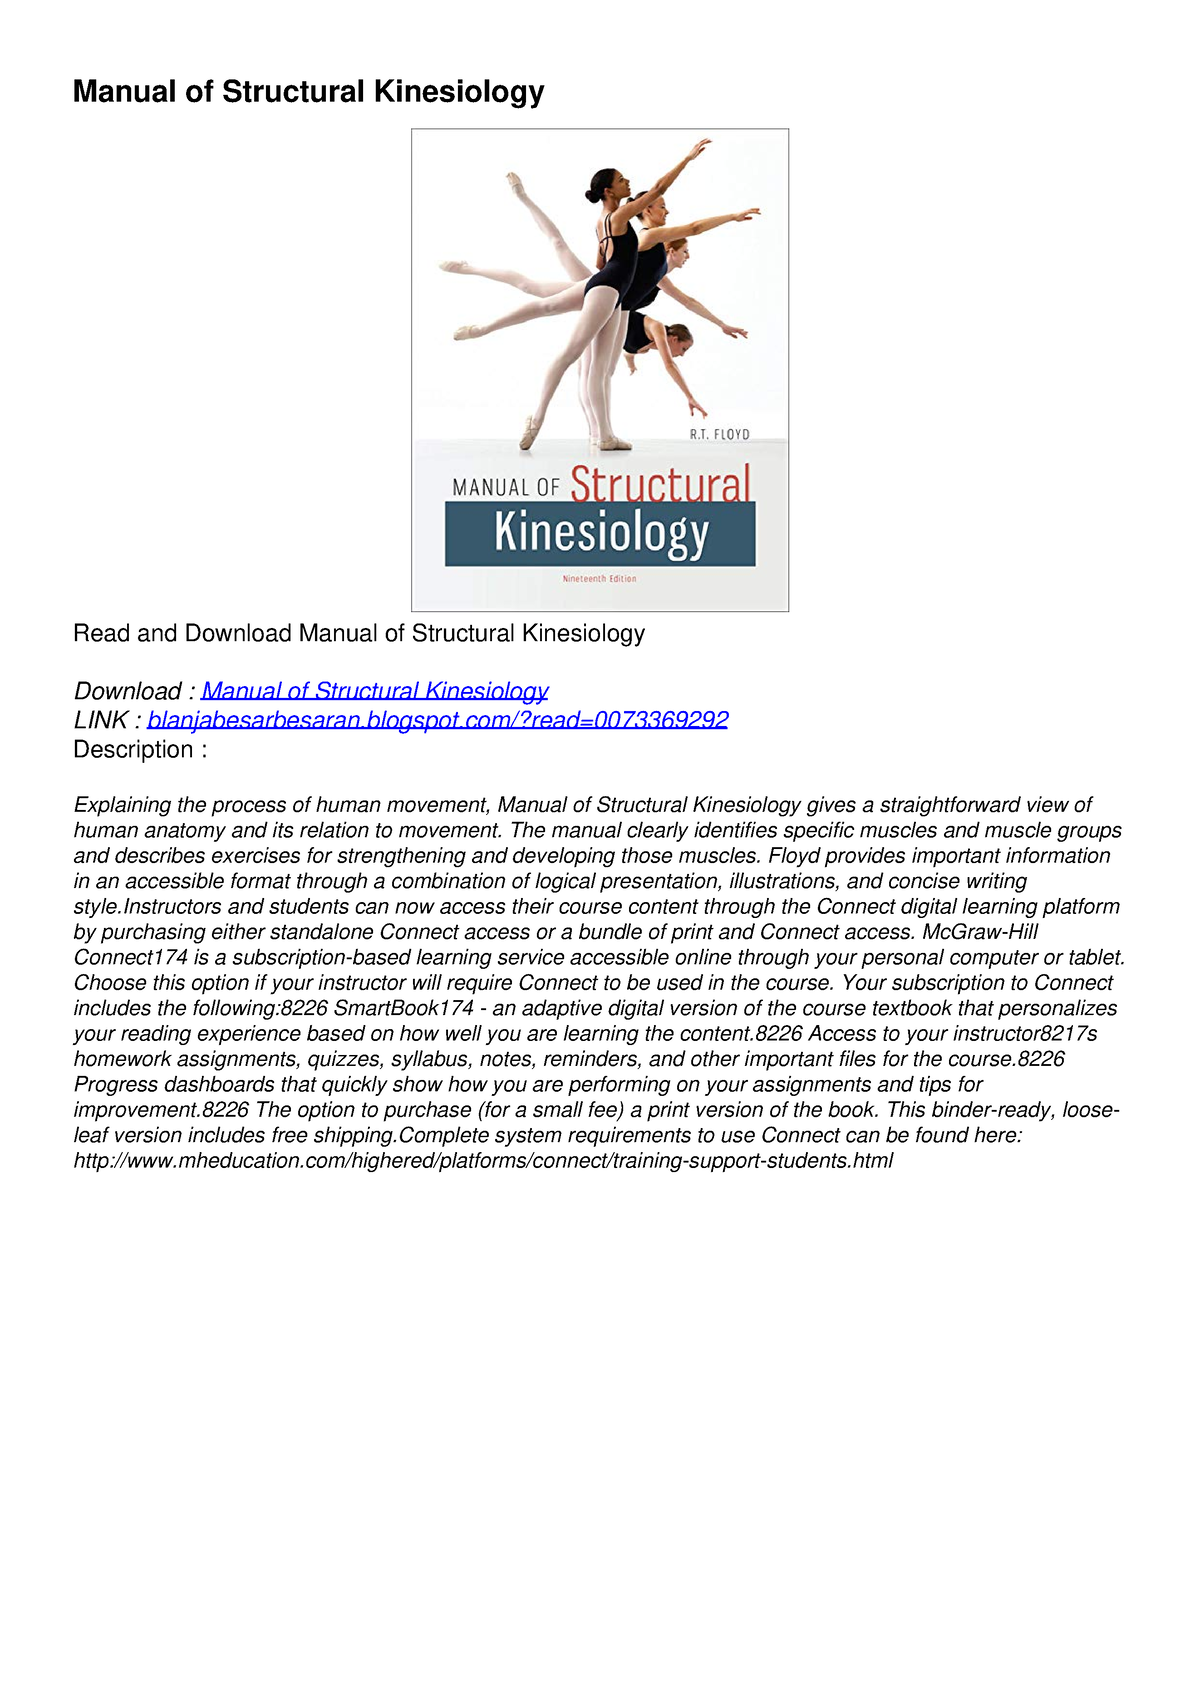 Pdf Kindle Download Manual Of Structural Kinesiology Android Manual Of Structural Kinesiology 4056